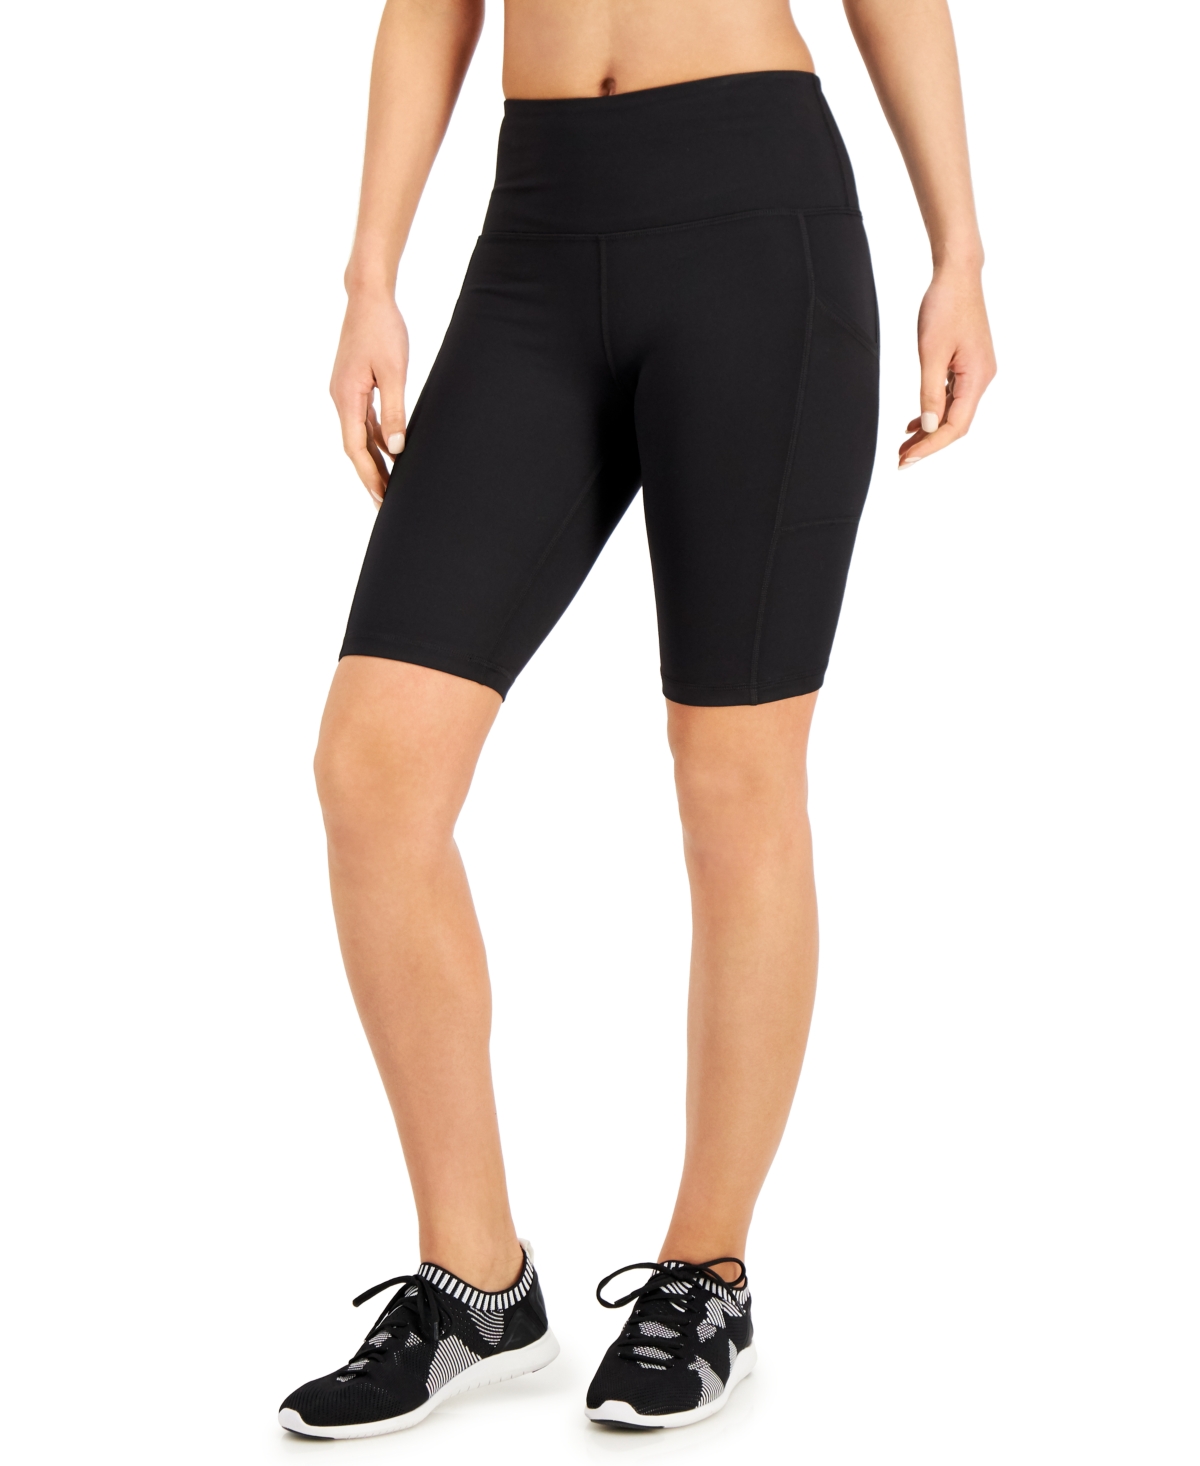 Women's Compression High-Rise 10" Bike Shorts, Created for Macy's - Deep Black